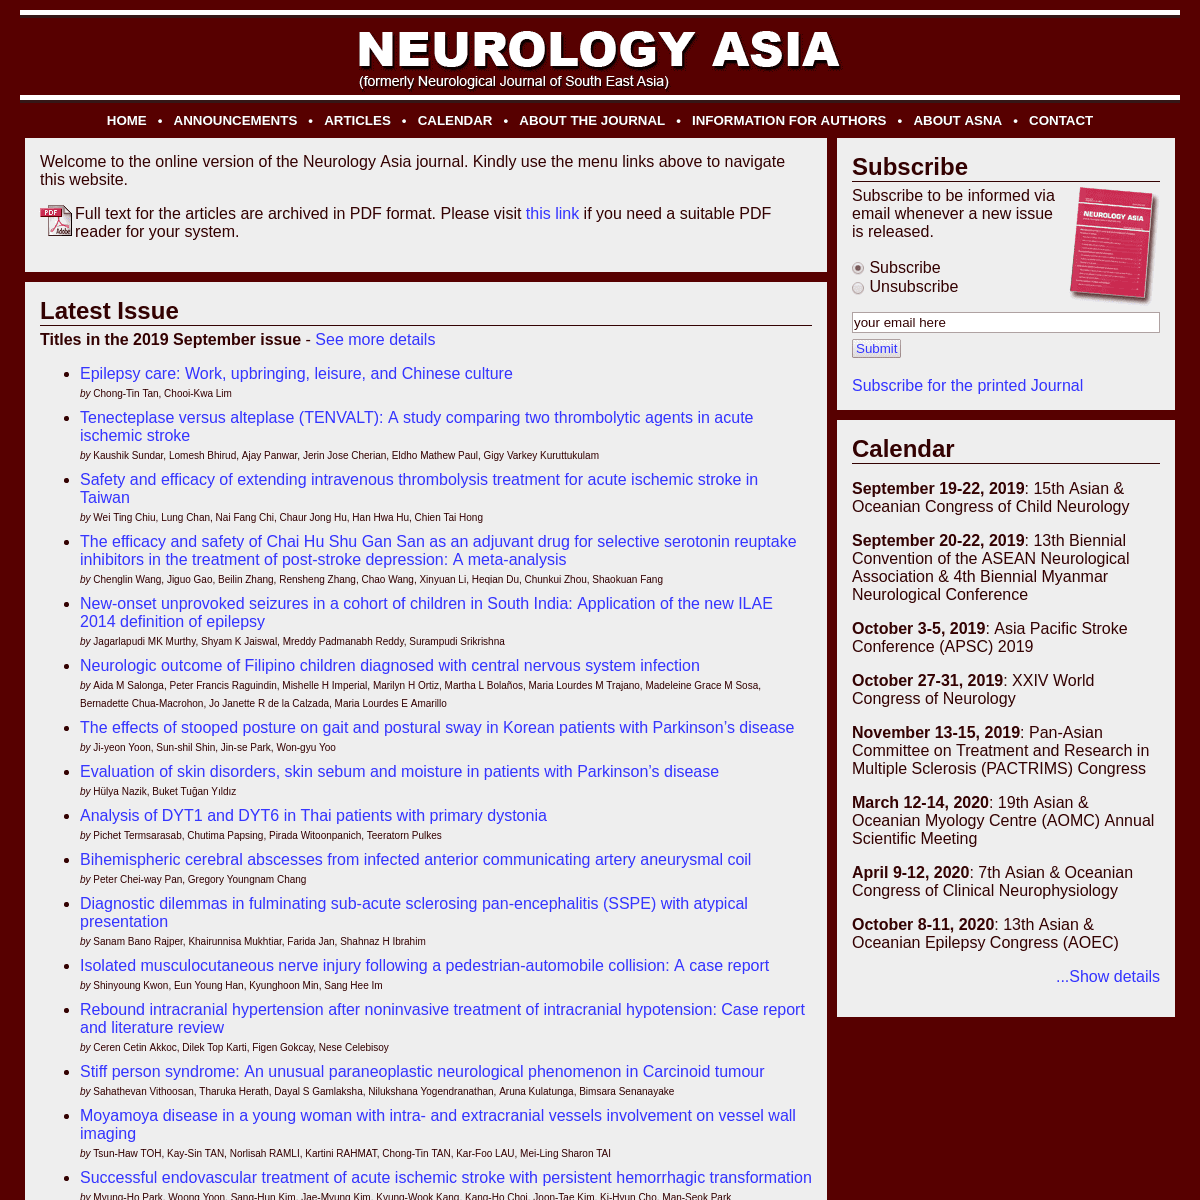 A complete backup of neurology-asia.org